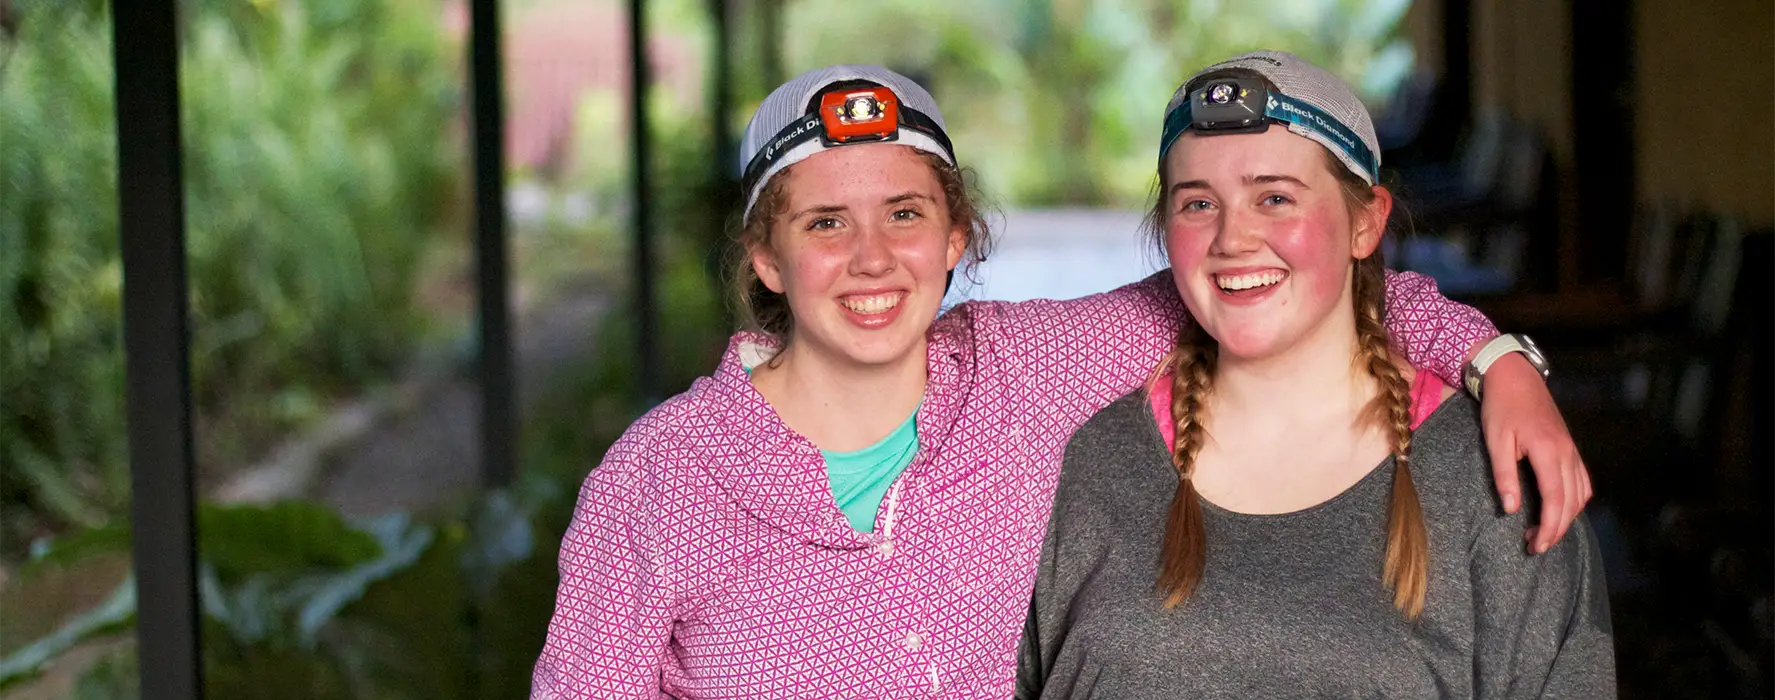 Two students wearing headlamps pose for a photo together.